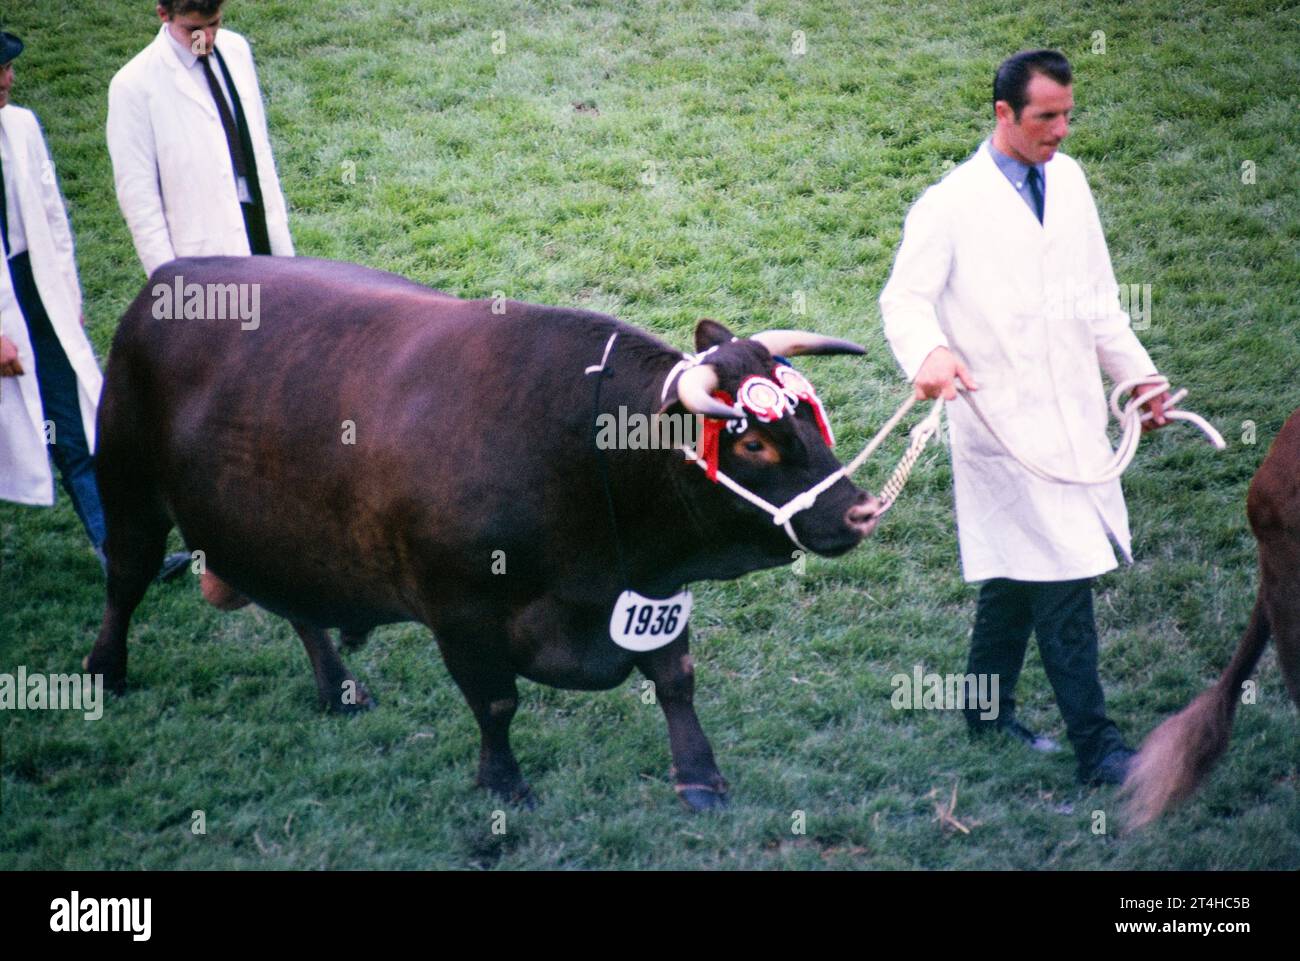 Royal Agricultural Society of England Show, The Royal Show, Stoneleigh, Warwickshire, Inghilterra, toro vincitore del premio UK 1967 Foto Stock